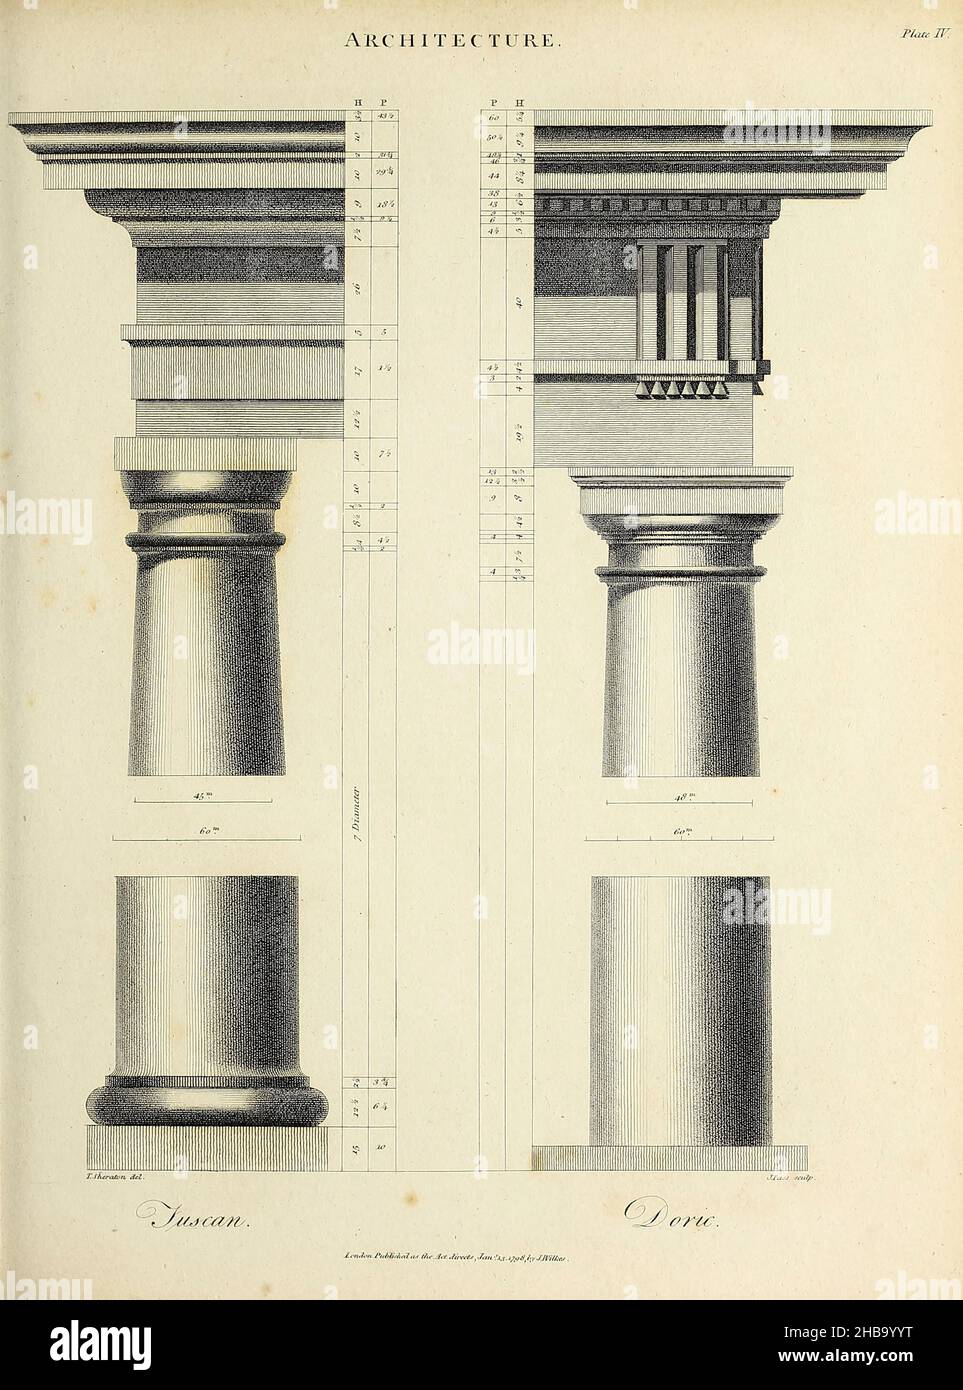 Illustration of a Tuscan order (left) and a Doric order (right). Copperplate engraving from the 'Encyclopaedia Londinensis, or, Universal Dictionary of Arts, Sciences and Literature; Volume II. Edited by John Wilkes. Published in London, Great, Britain, in 1810. Stock Photo